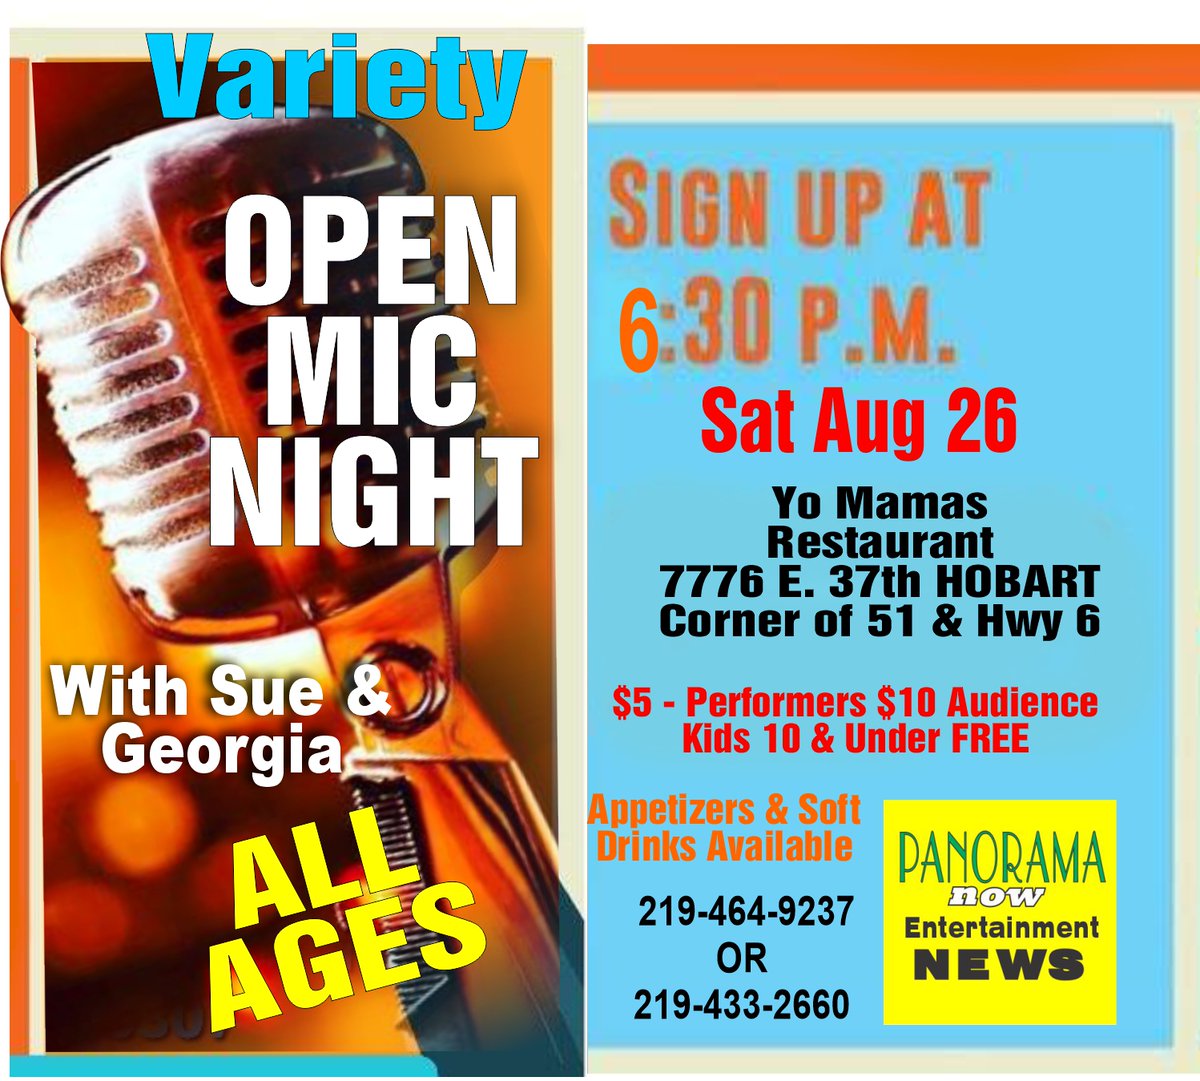 All Ages Variety Open Mic is Sat. Aug 26 at Yo Mama's #OpenMic #OpenStage #Comedy #Poetry #SpokenWord #SingerSongWriter #Hobart #HobartIndiana #NwiOpenMic #Clowns #StandUpComedy #Comedians #PoetrySlam #Storytelling